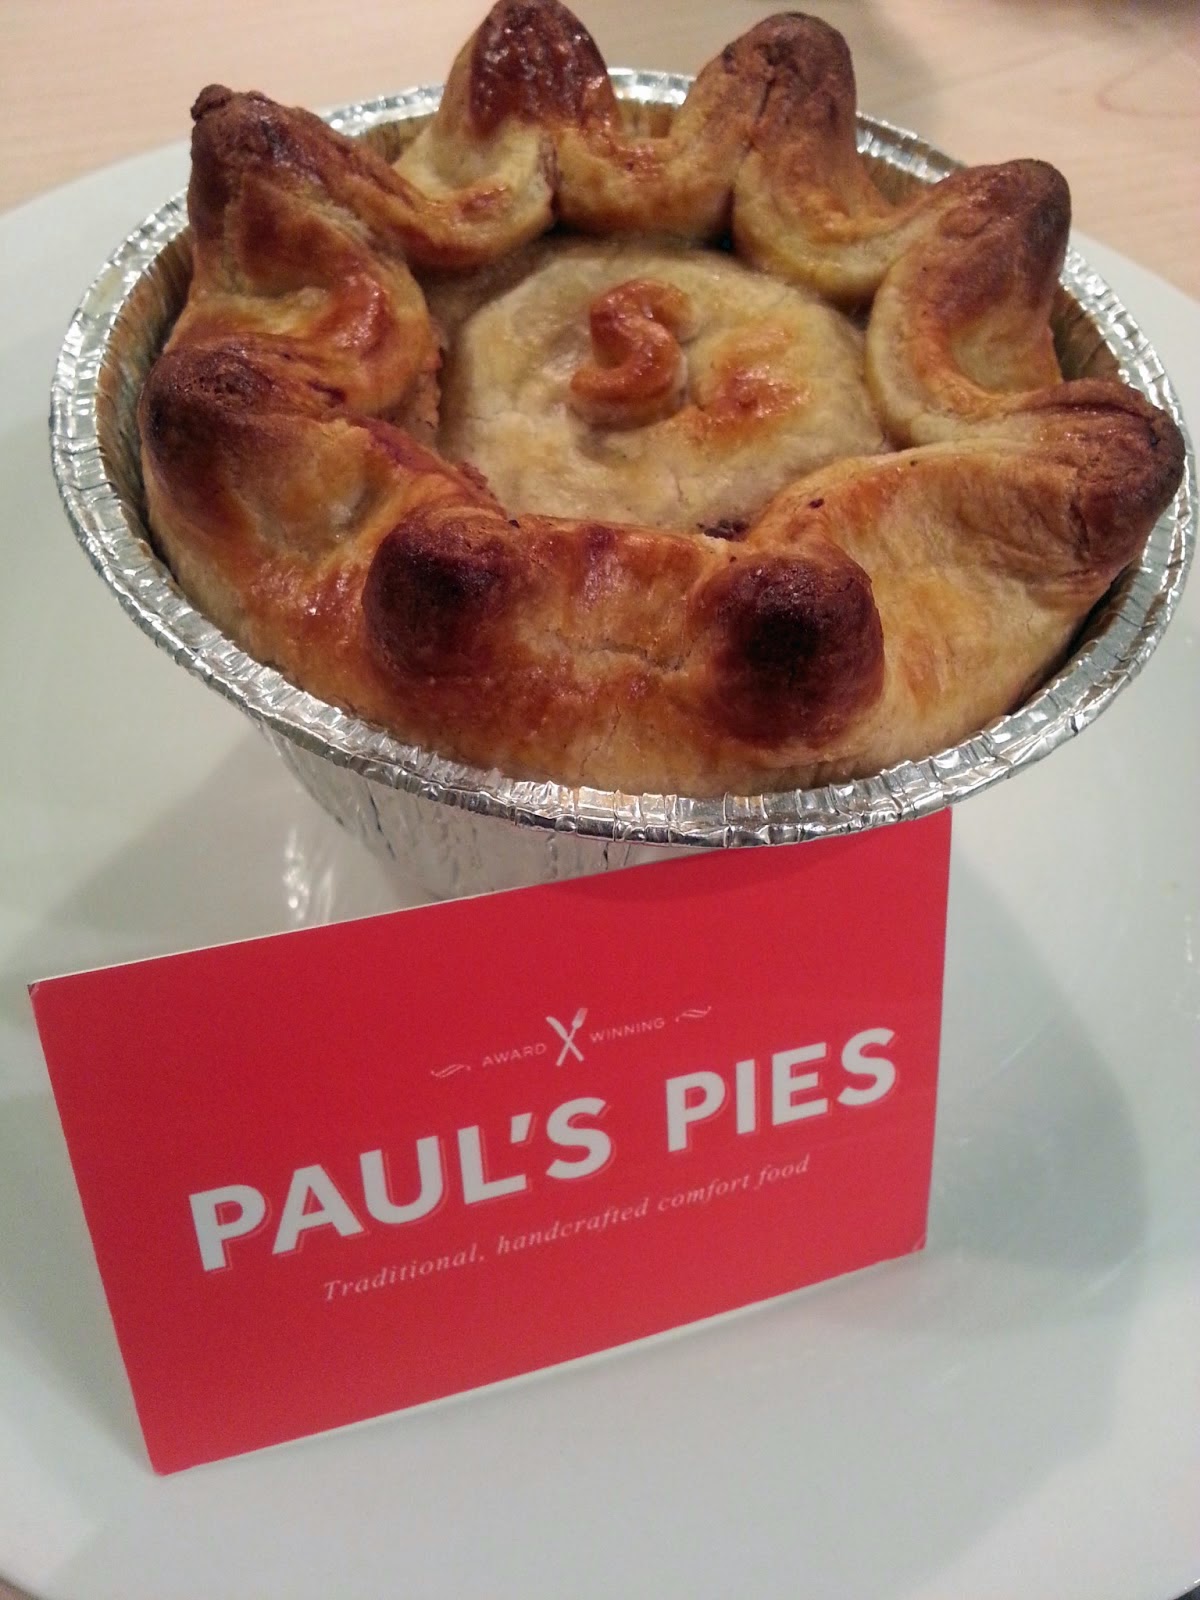 Currently Britain's Best Pie - Paul's Pies